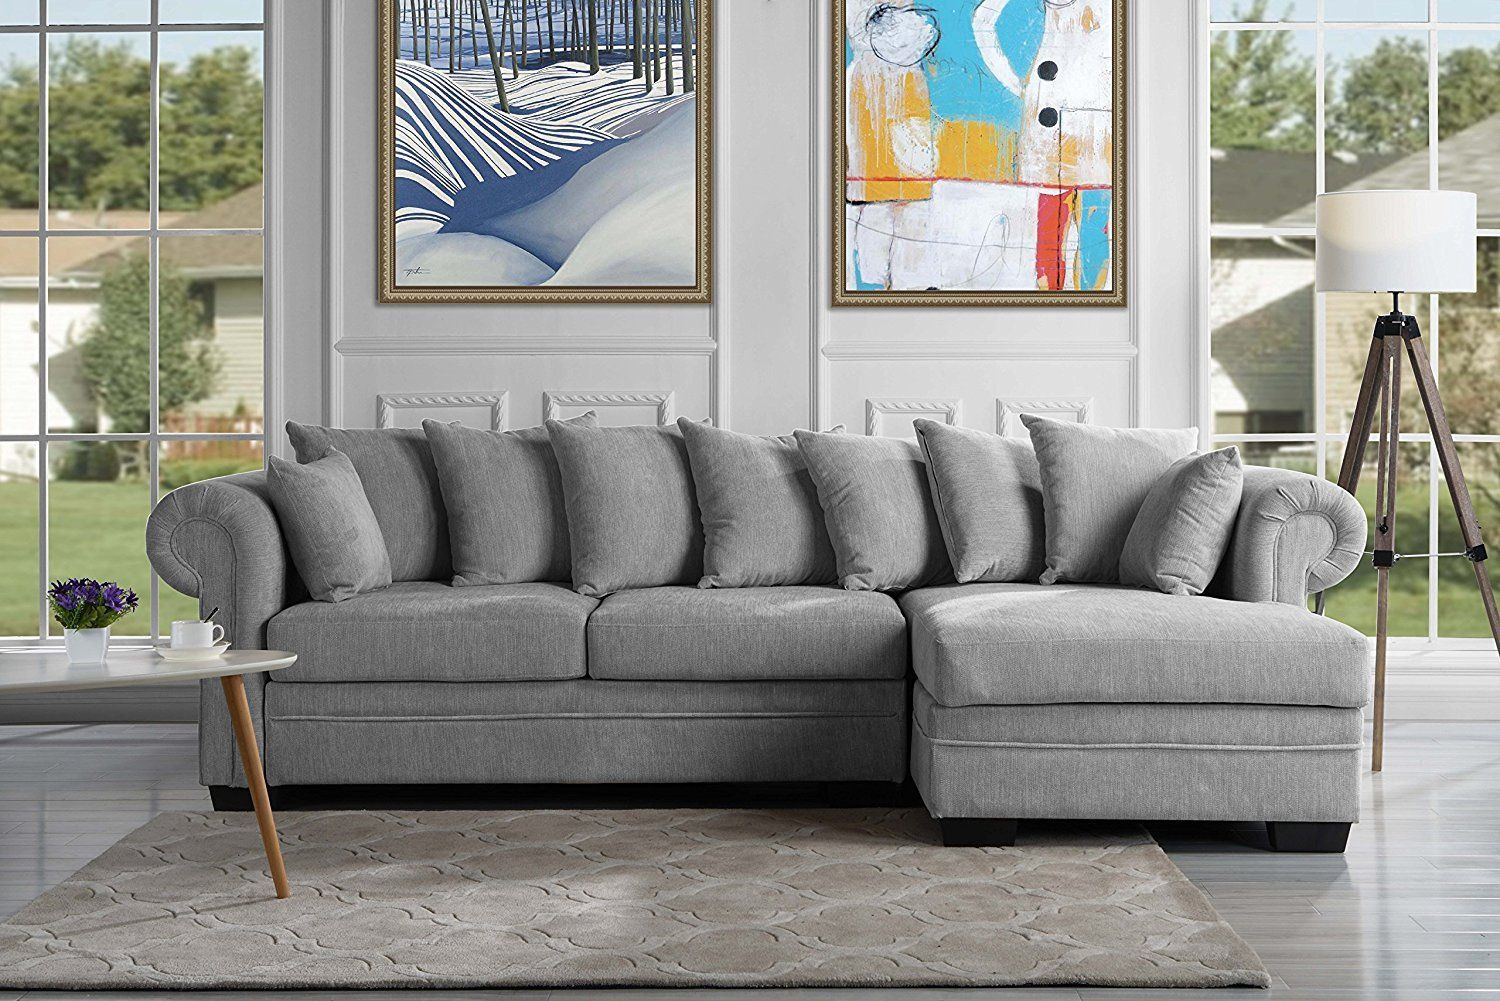 Modern Large Sectional Sofa, L Shape Couch W/ Extra Wide Chaise, Light With Sofas In Light Grey (View 20 of 20)